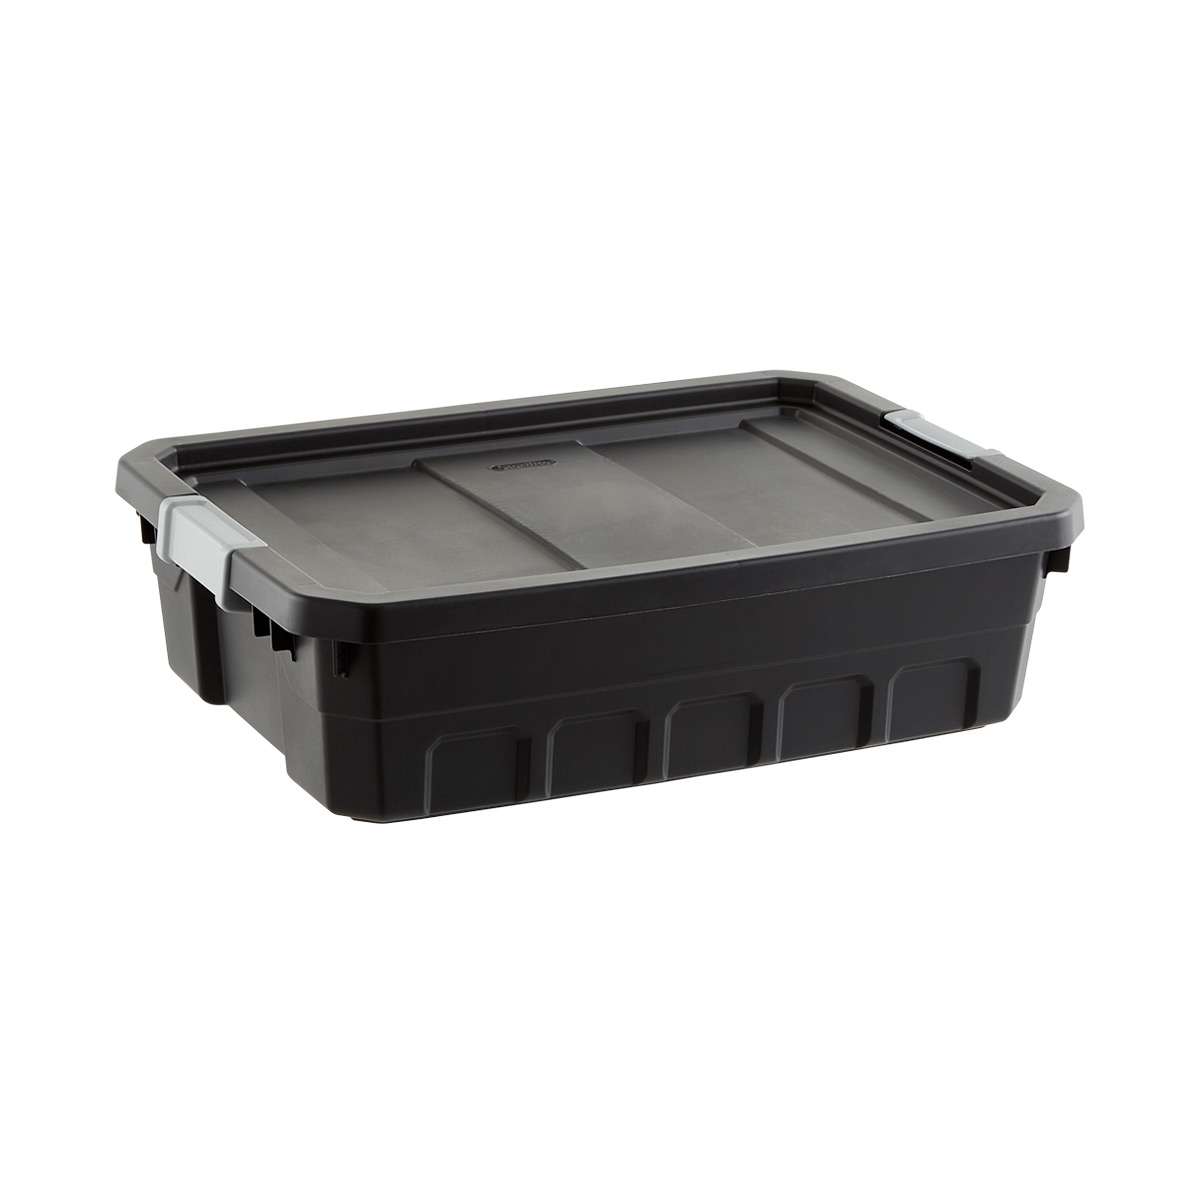 https://www.containerstore.com/catalogimages/337793/10074299-Stacker-Tote_10gal-Black.jpg